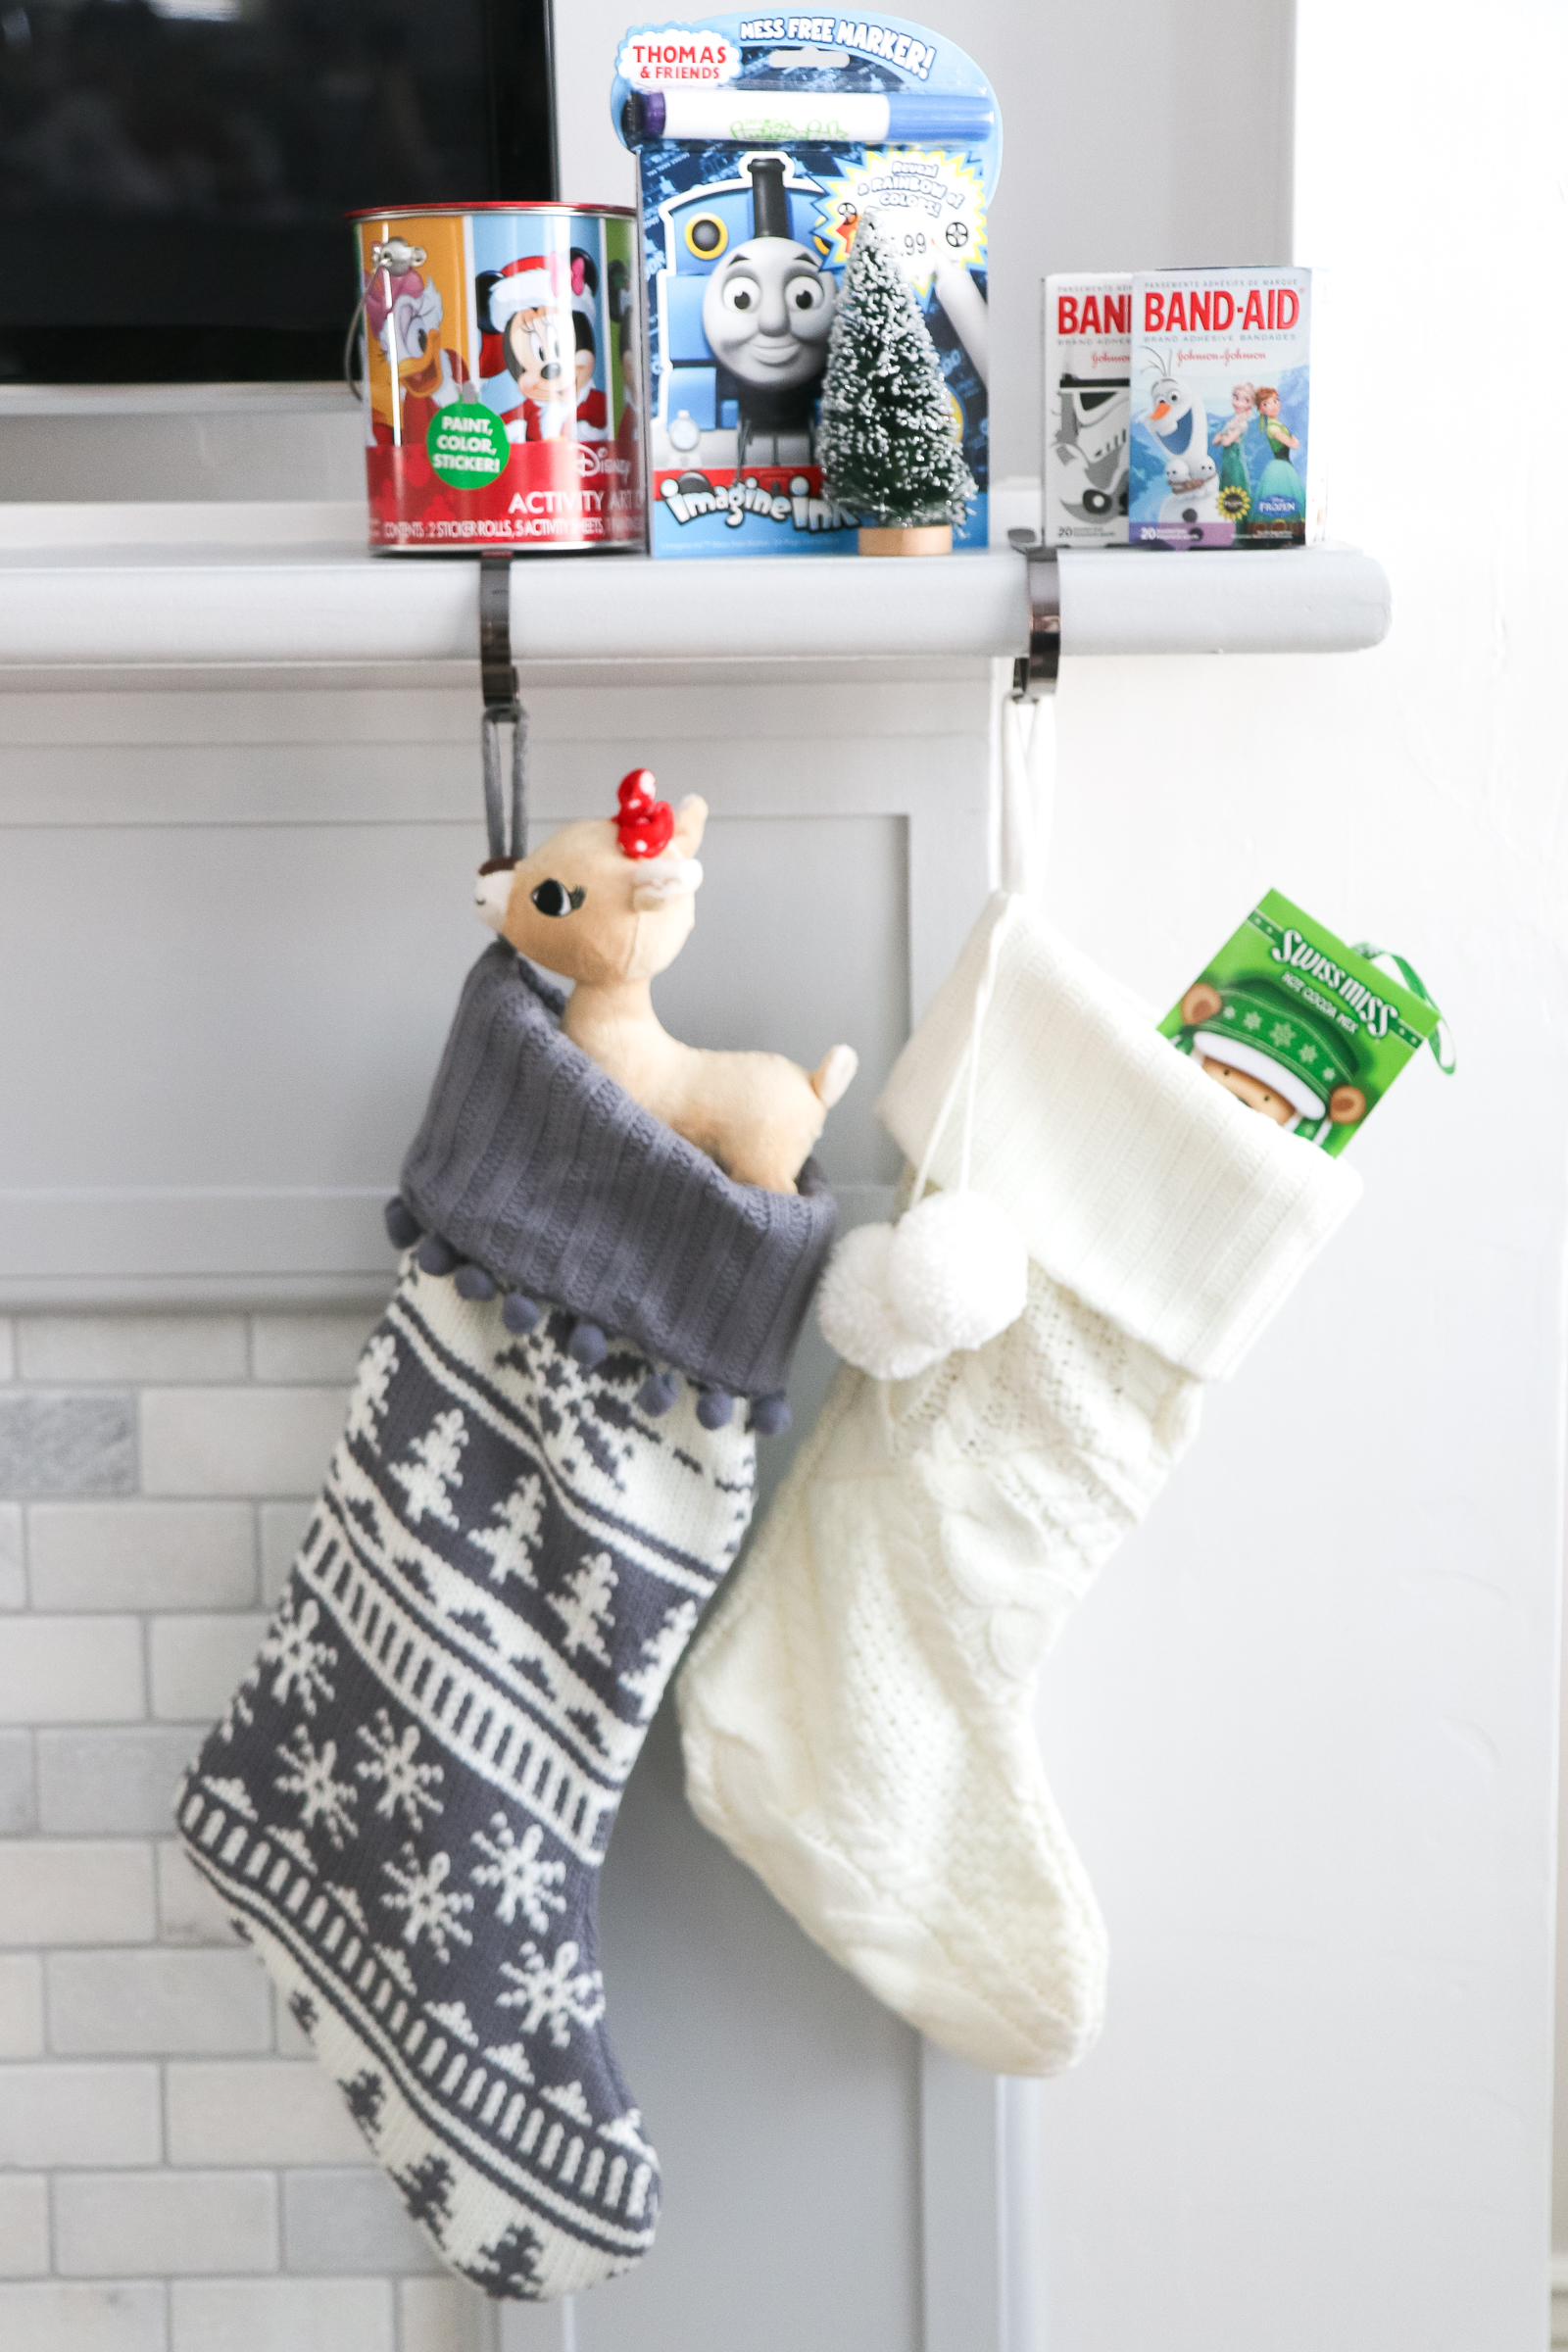 Holiday Stocking Stuffers For The Family by popular Utah blogger Sandy A La Mode